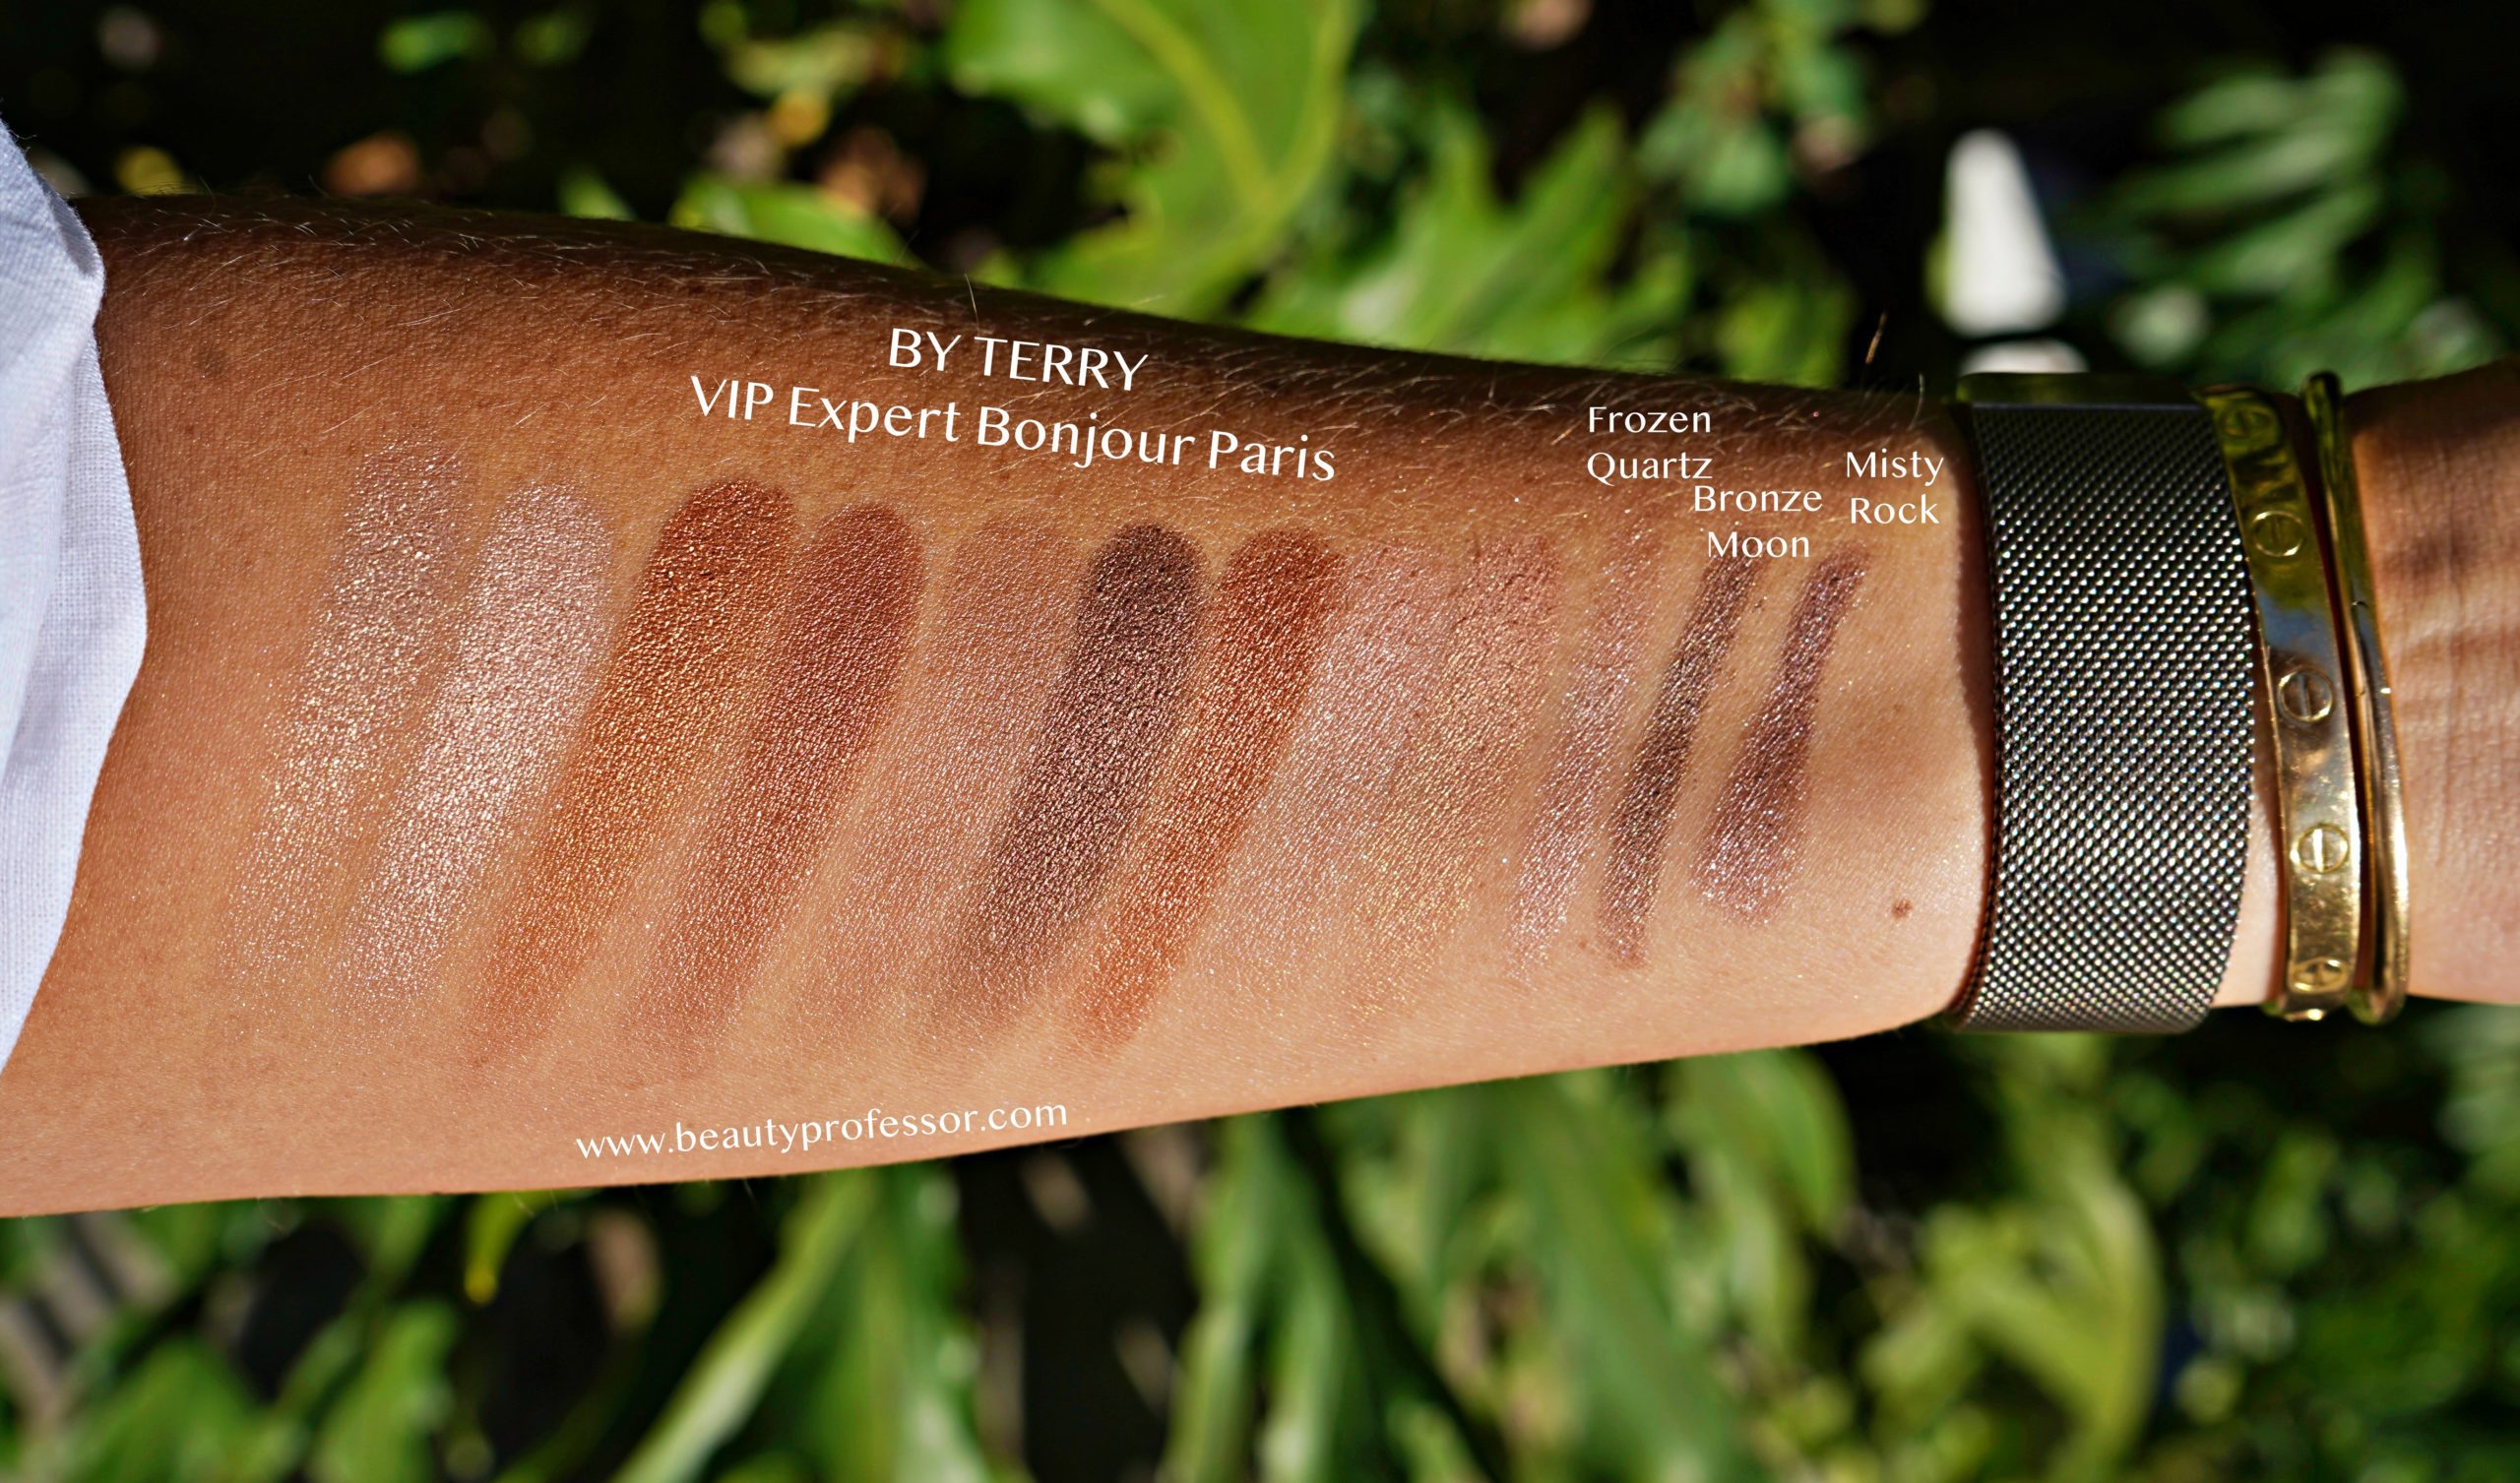 BY TERRY VIP Expert Bonjour Paris Palette swatches from the Beautylish gift card event